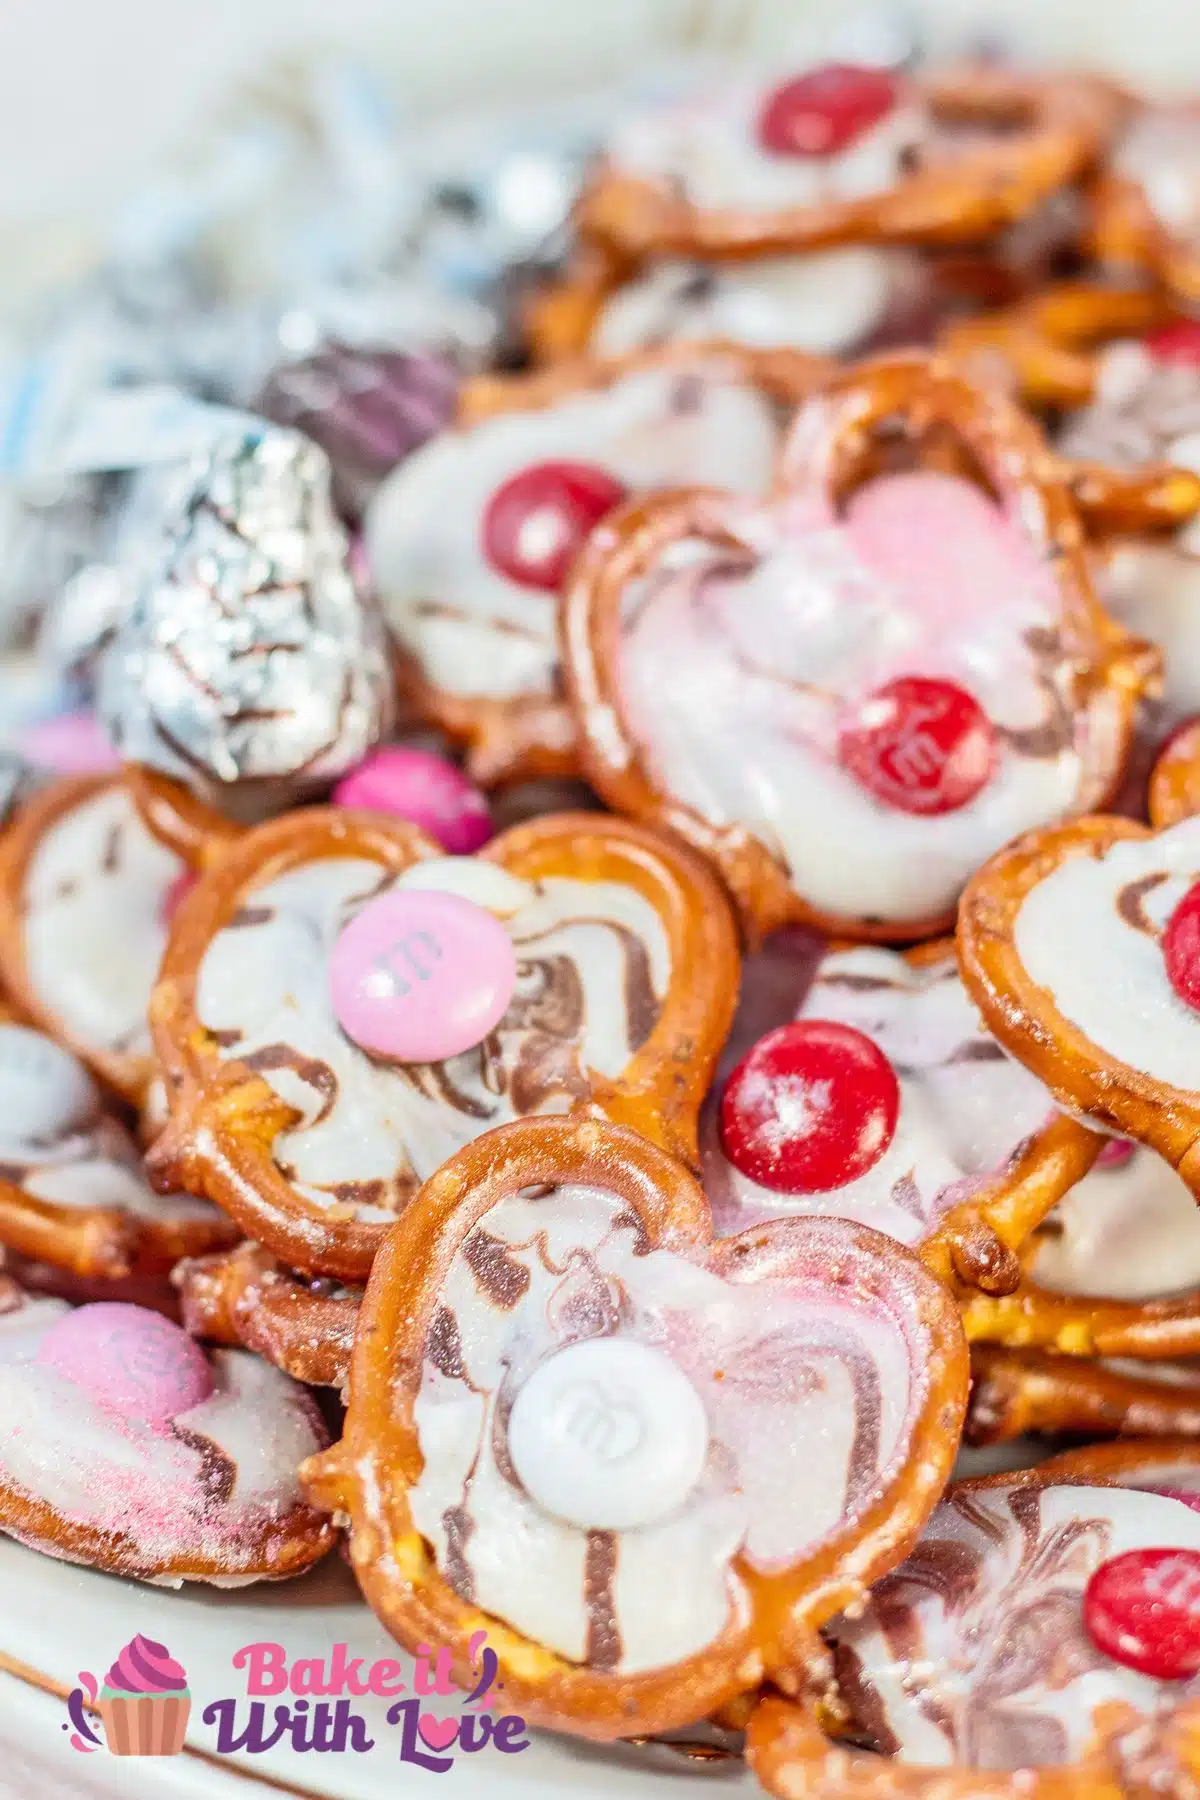 Valentine's Day pretzel hugs candies arranged on a serving plate with foil wrapped Hershey's hugs candies.